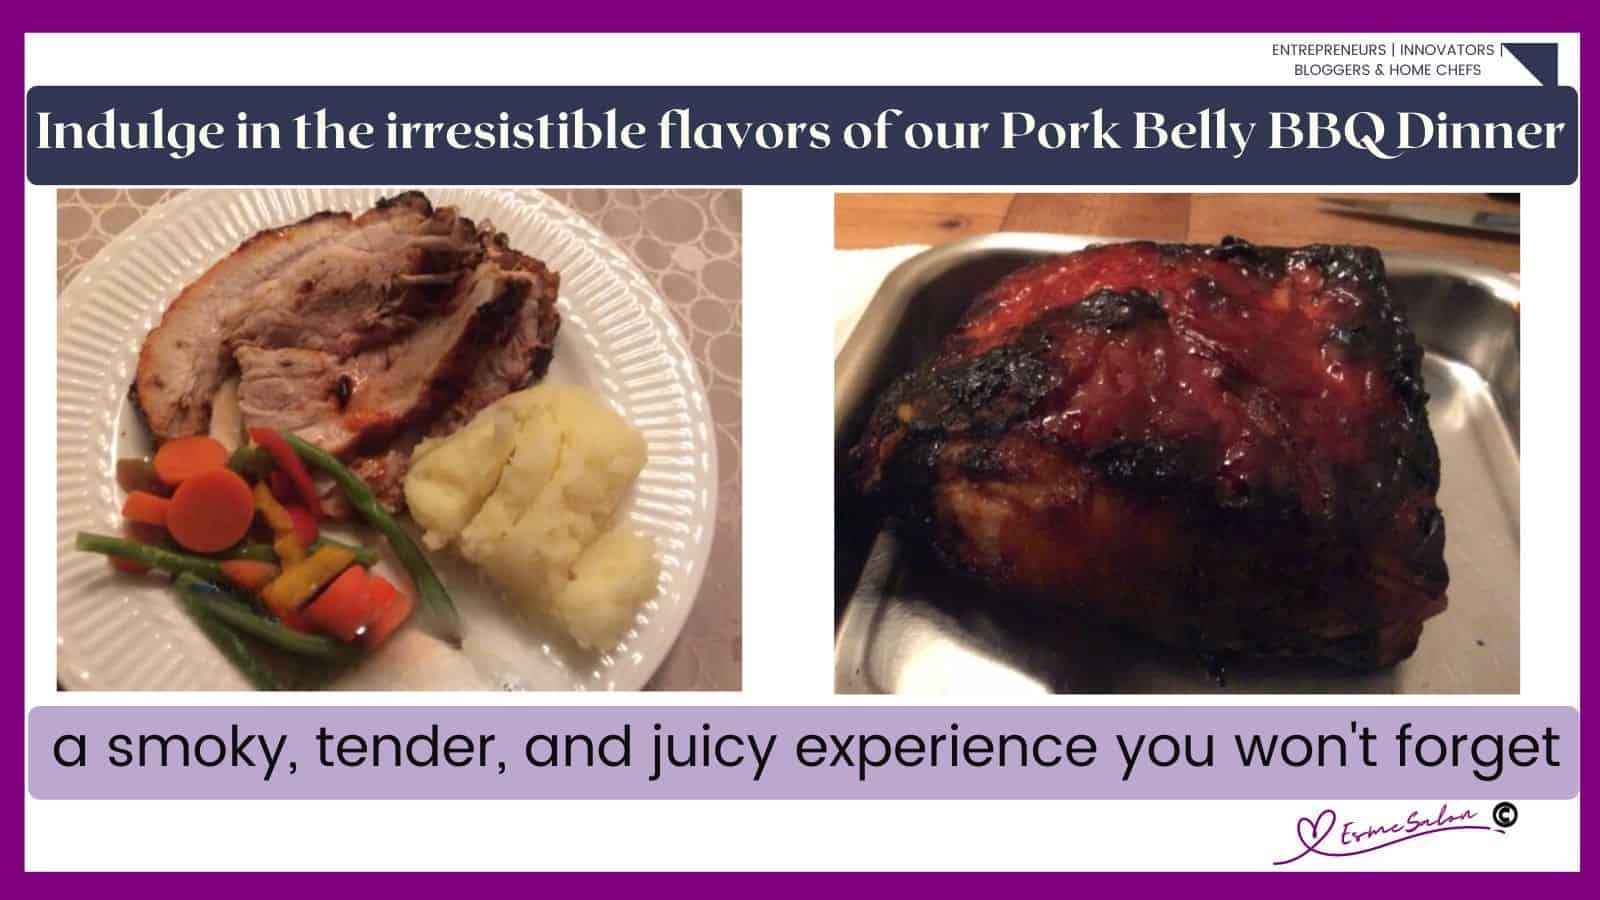 an image of a pork belly done on the BBQ as well as sliced and served with veggies and mashed potatoes